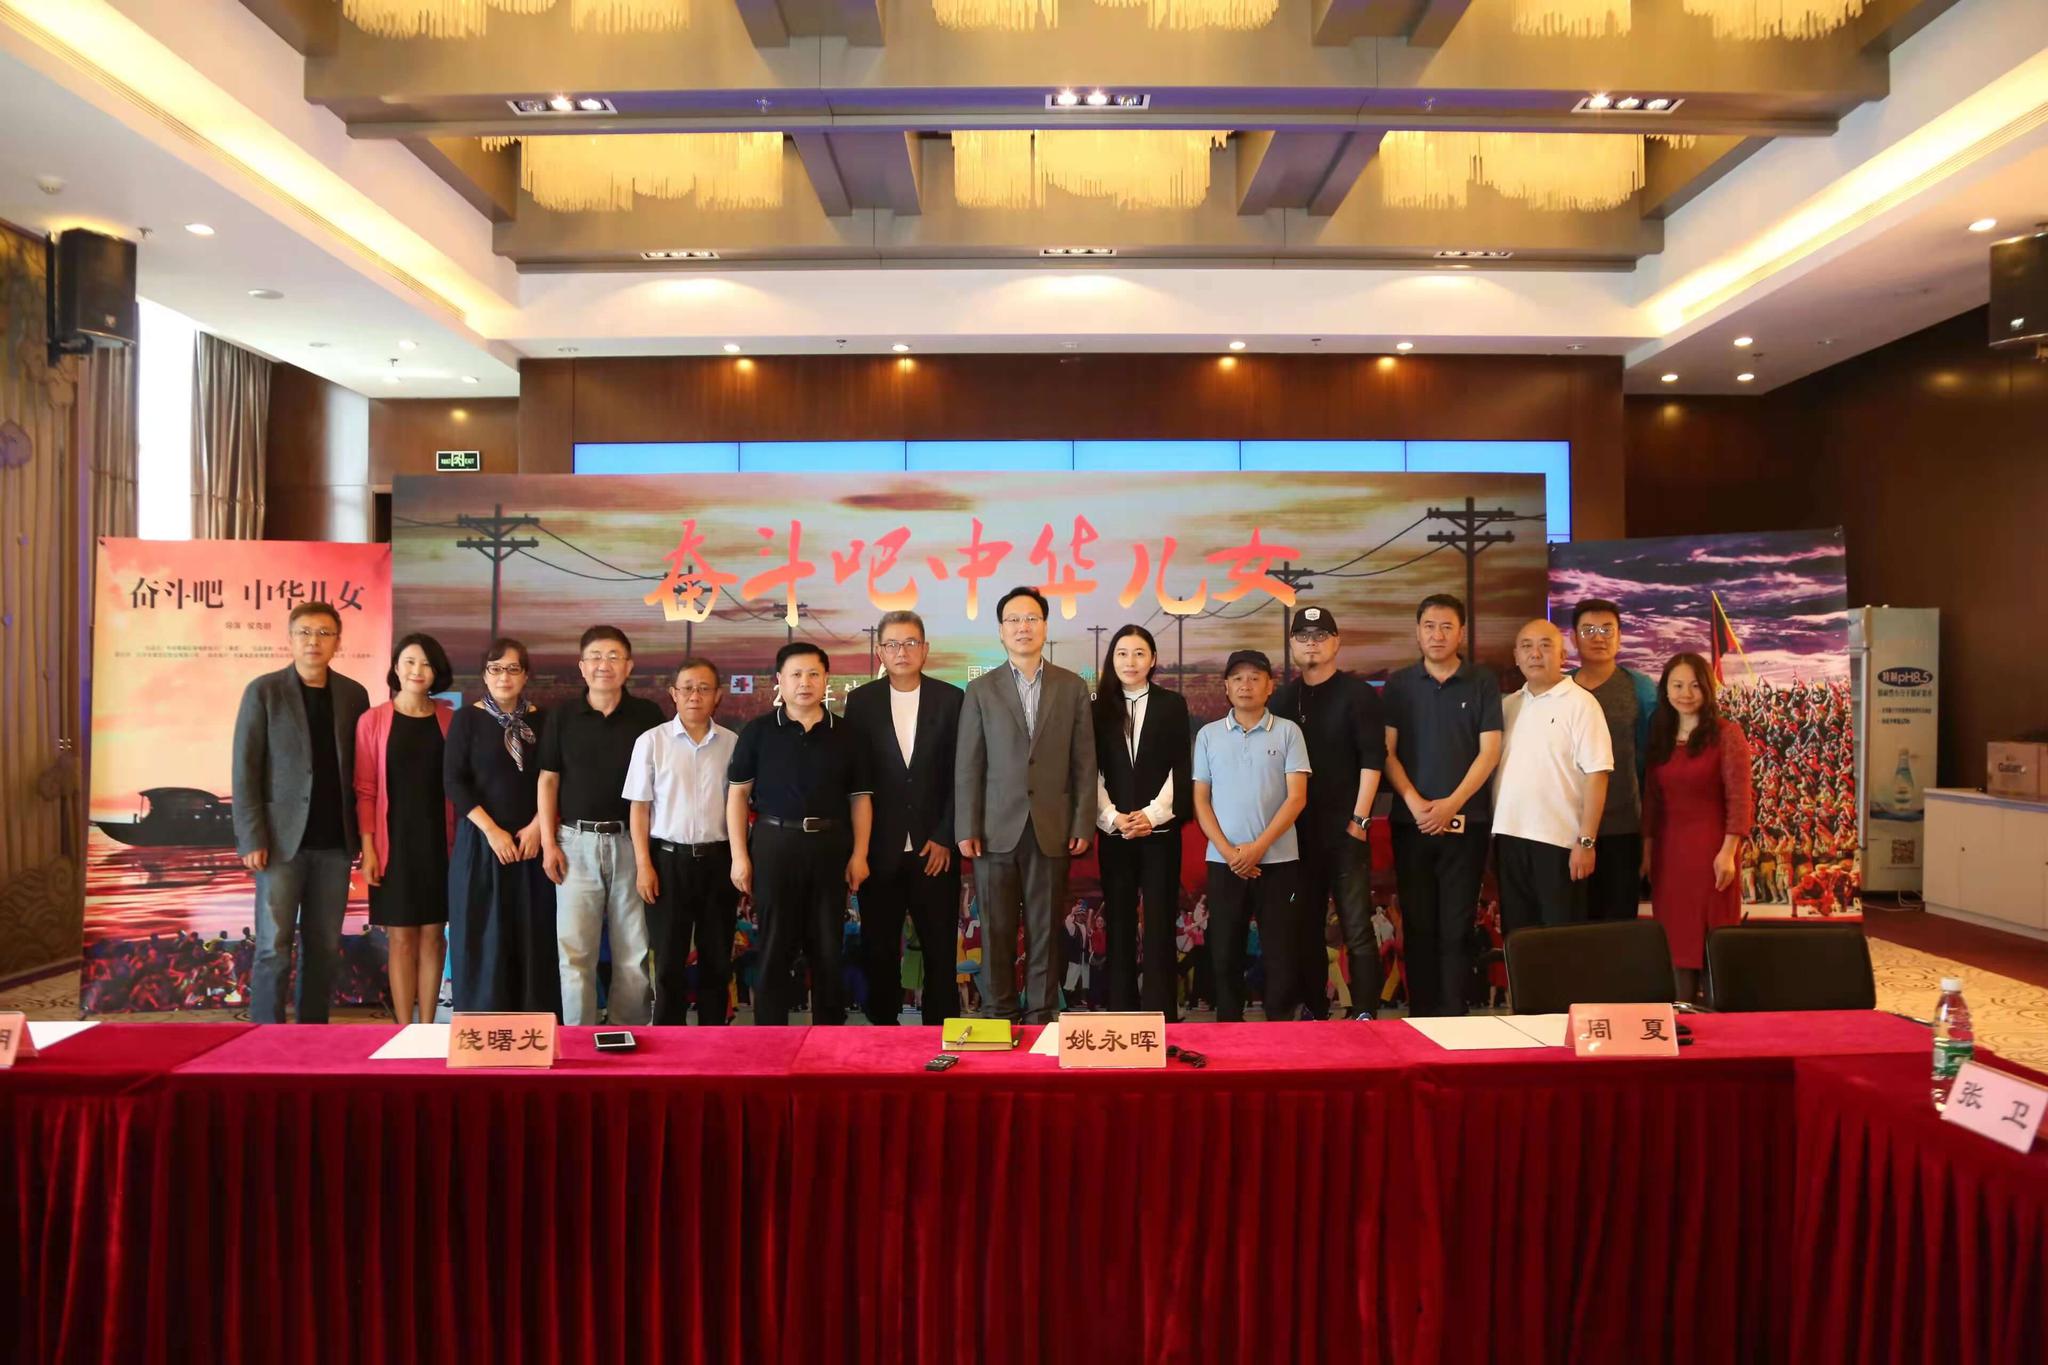 △Director Hou Keming, General Manager Yao Yonghui of Xinying Group, Rao Shuguang, President of China Film Critics Society, and Li Daoxin, Vice Dean of the School of Art of Peking University attended the seminar